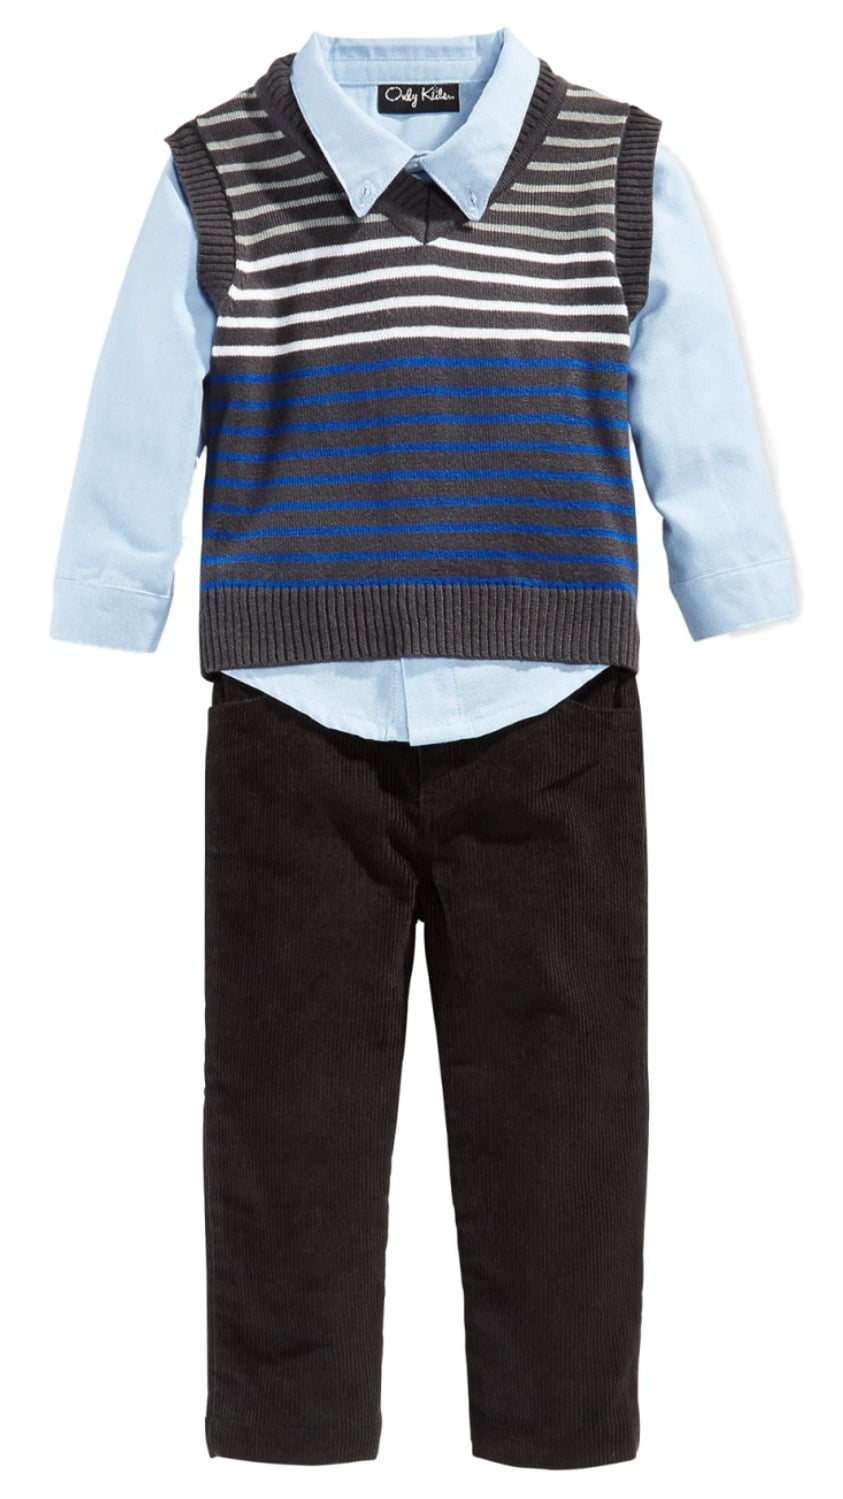 Only Kids - Only Kids Infant Boys 3 Piece Dress Up Outfit Pants Shirt ...